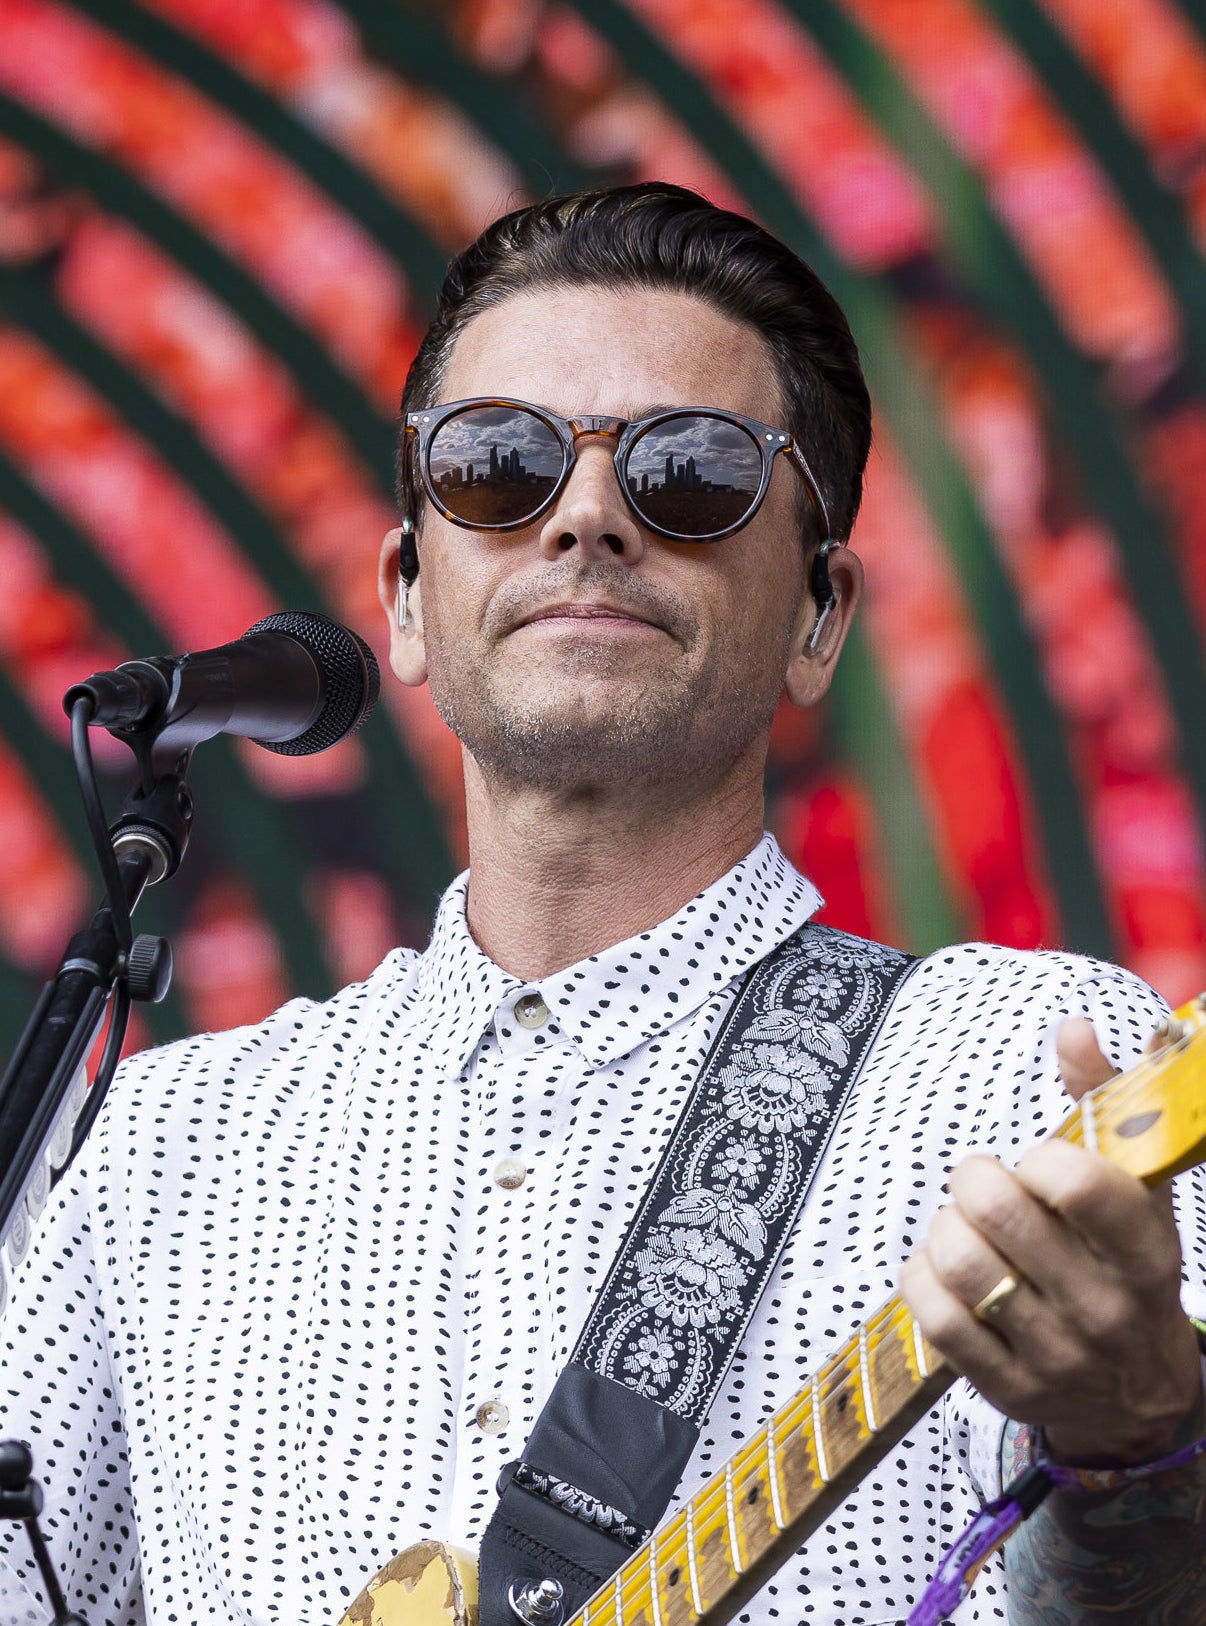 Chris Carrabba onstage